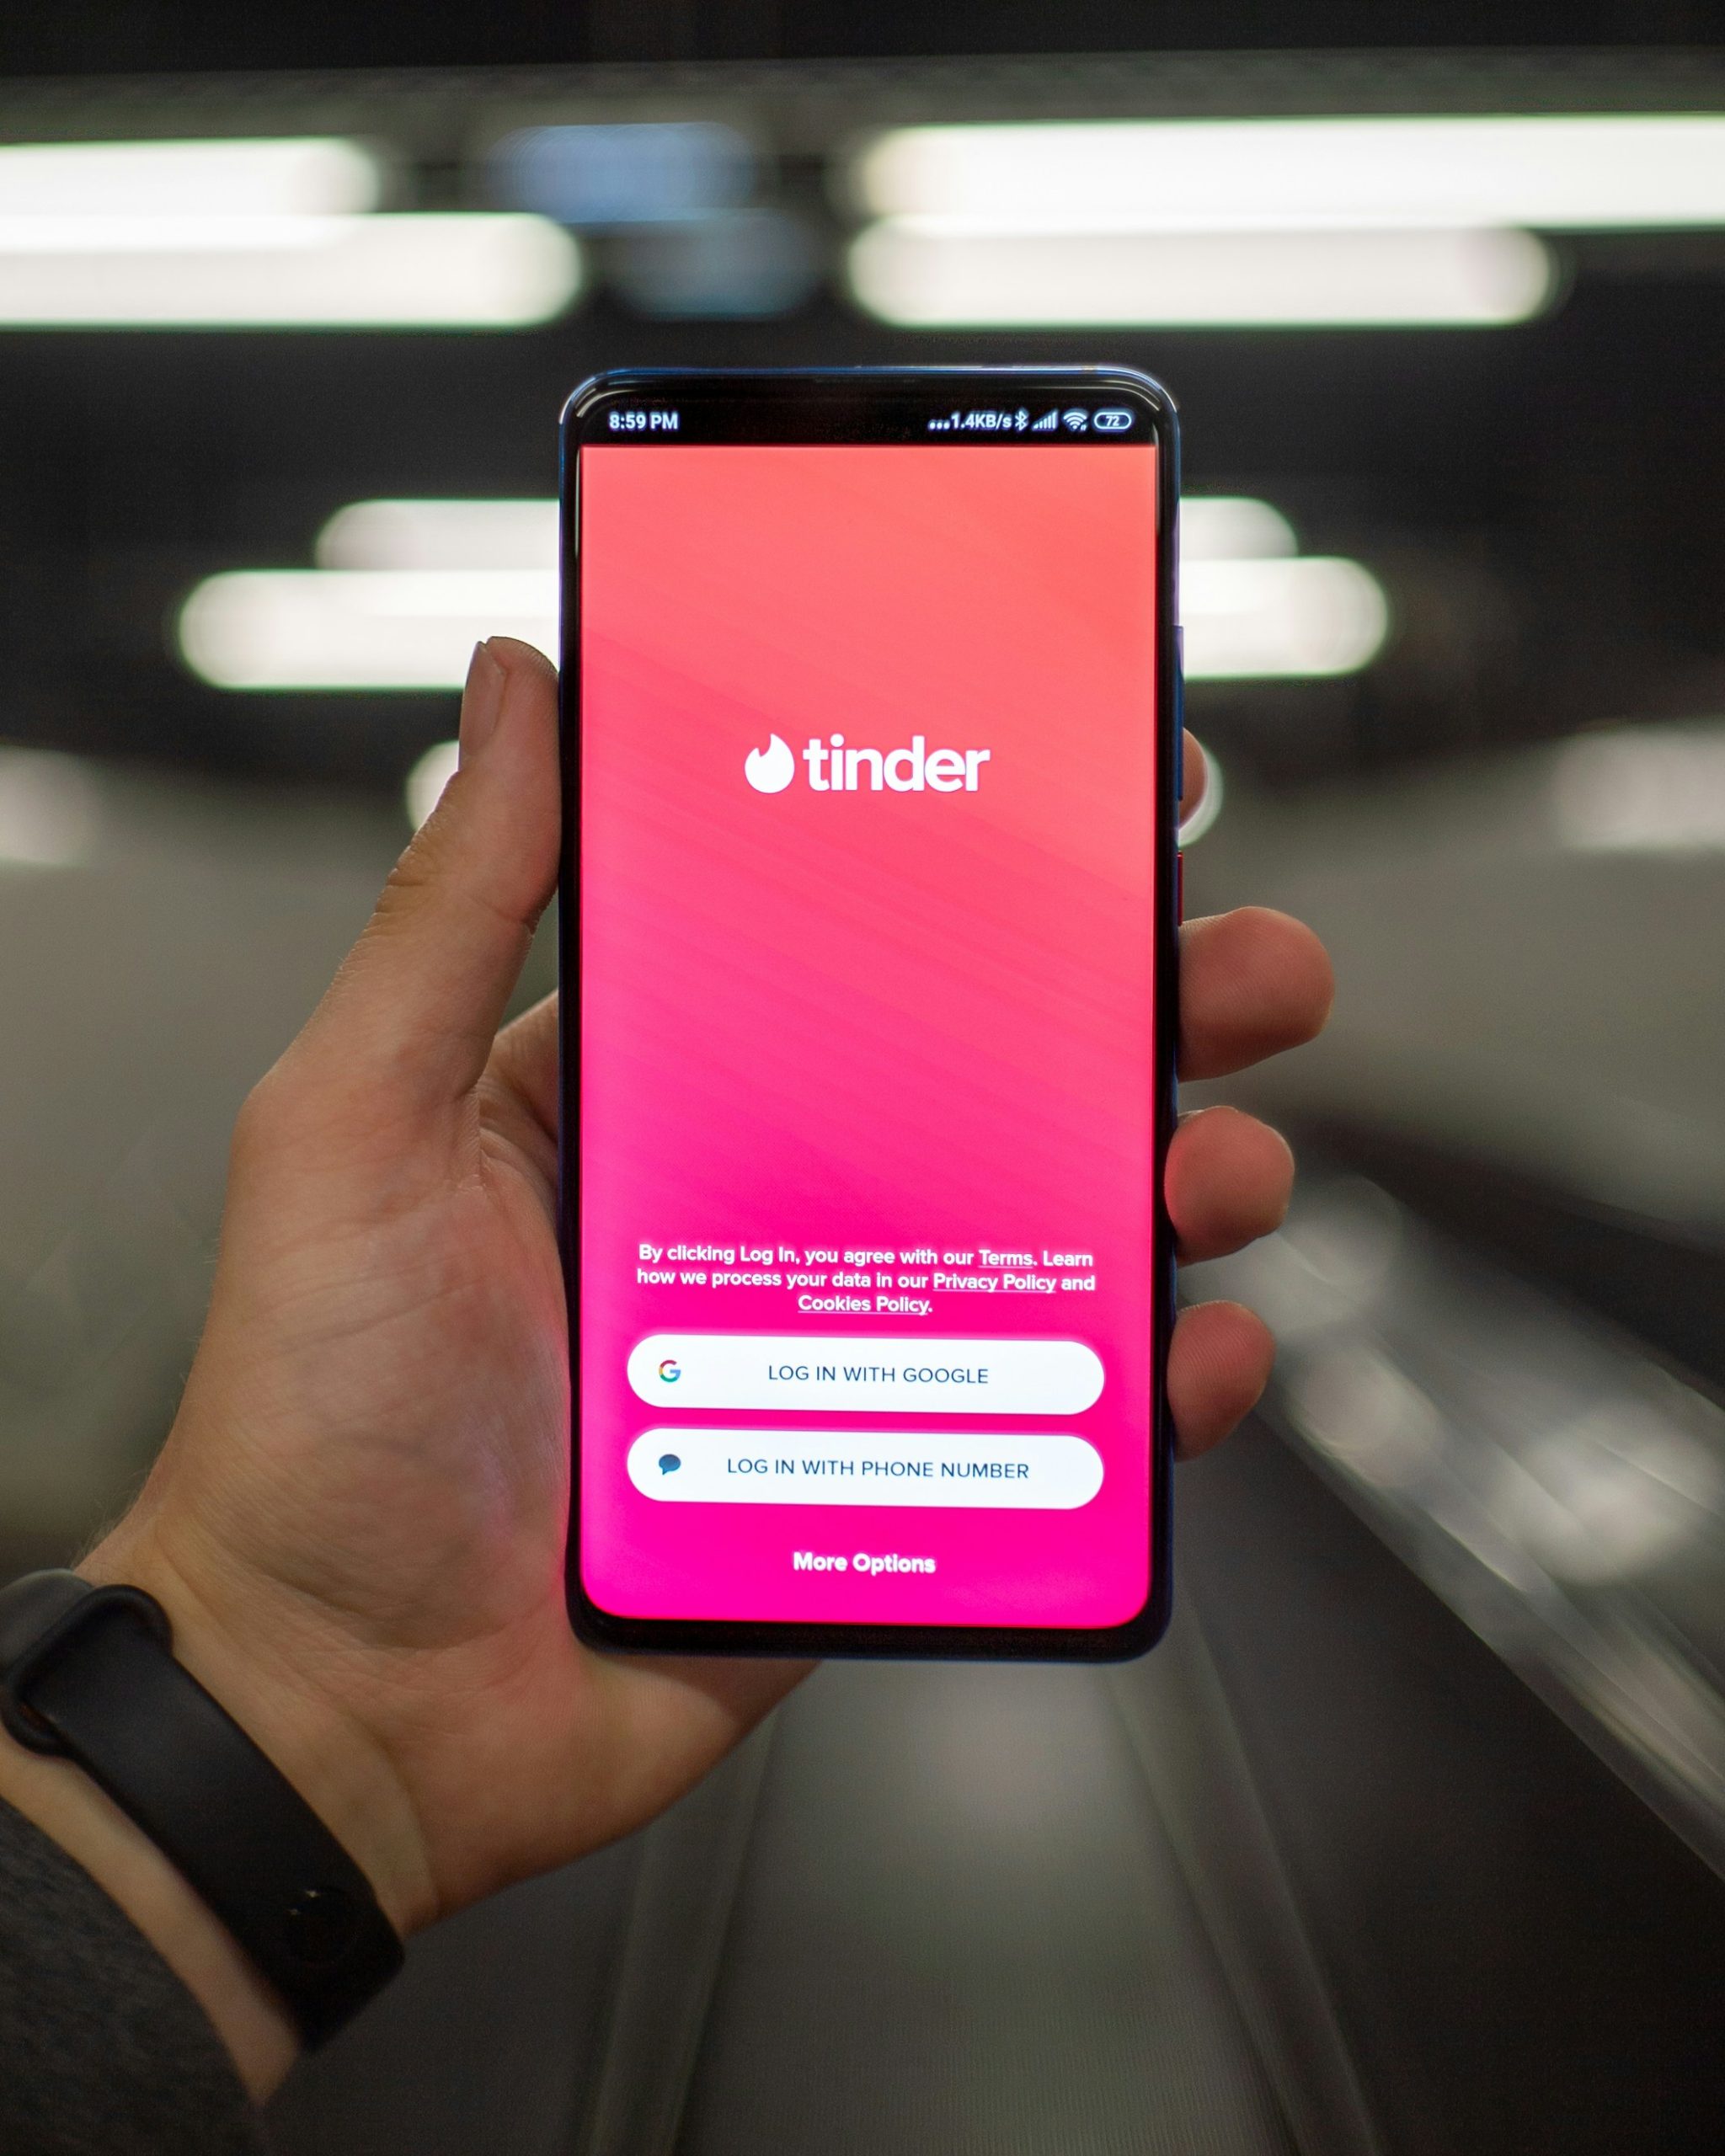 Tinder Introduces ID Verification Checks in the UK and US